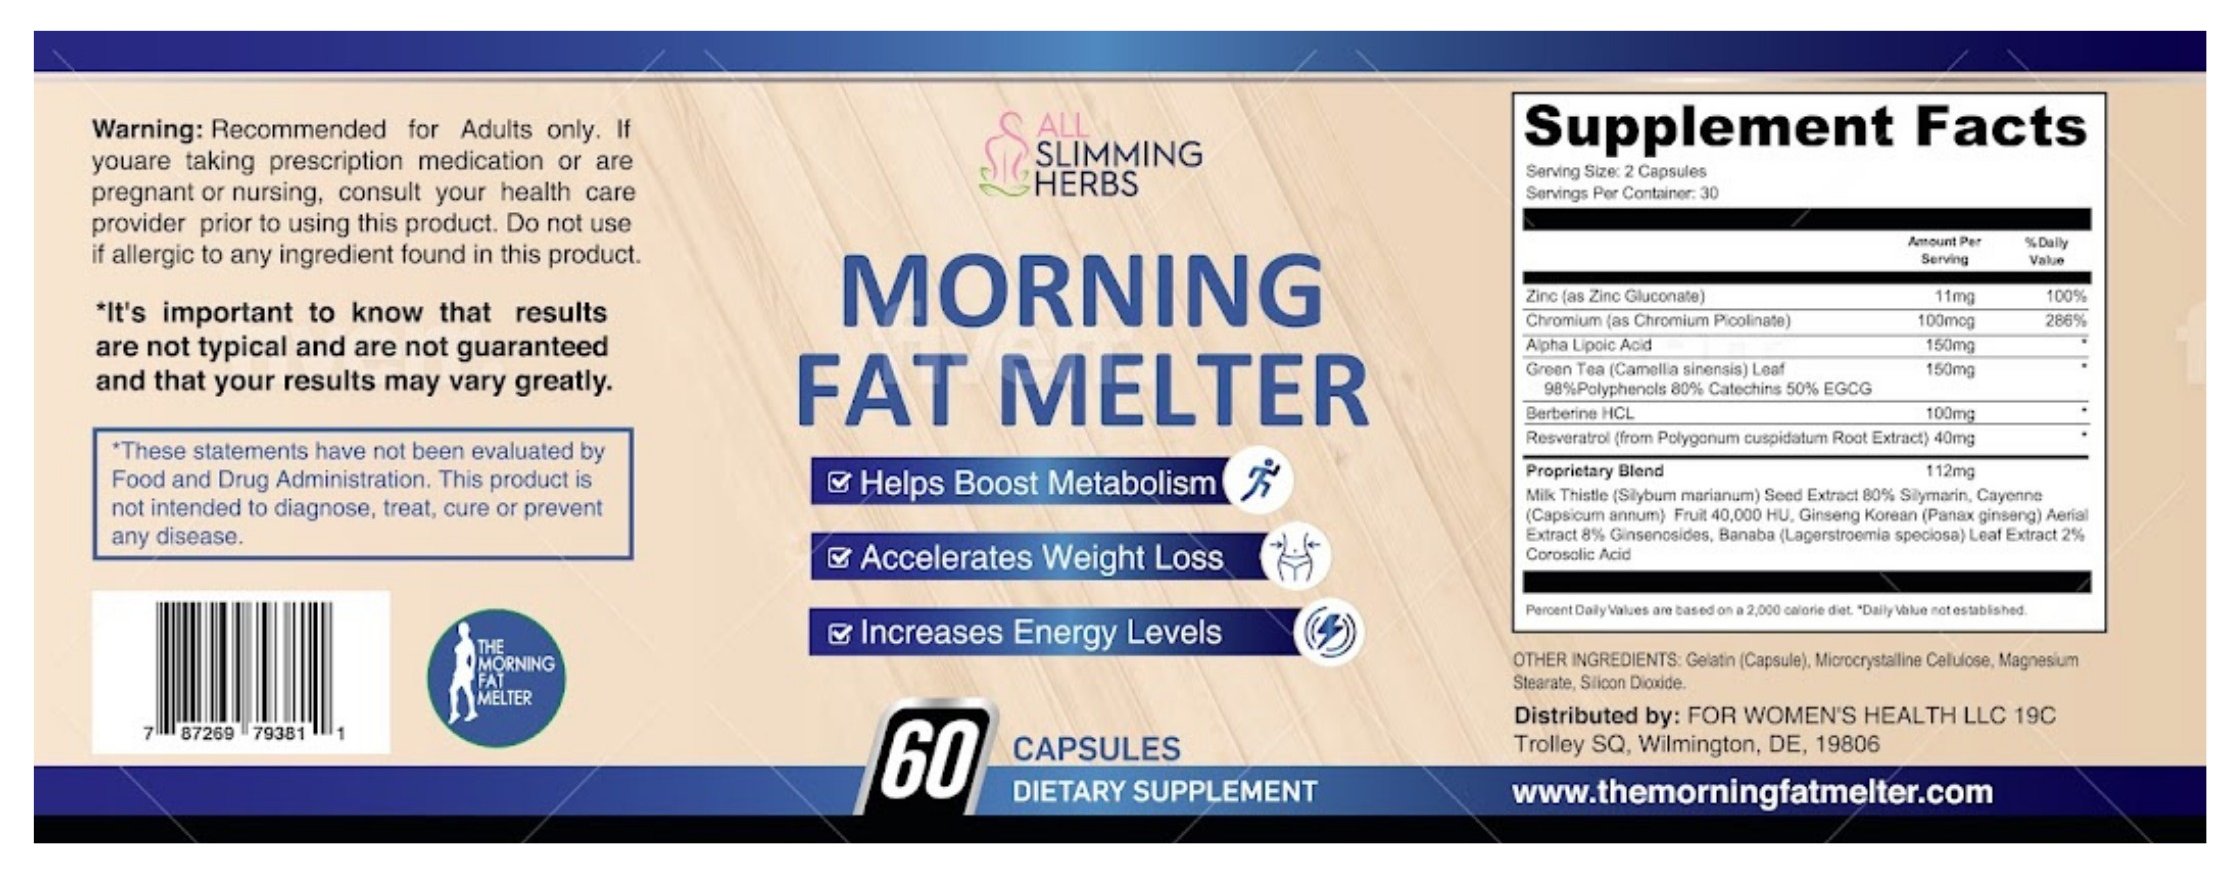 Morning Fat Melter Supplement Facts